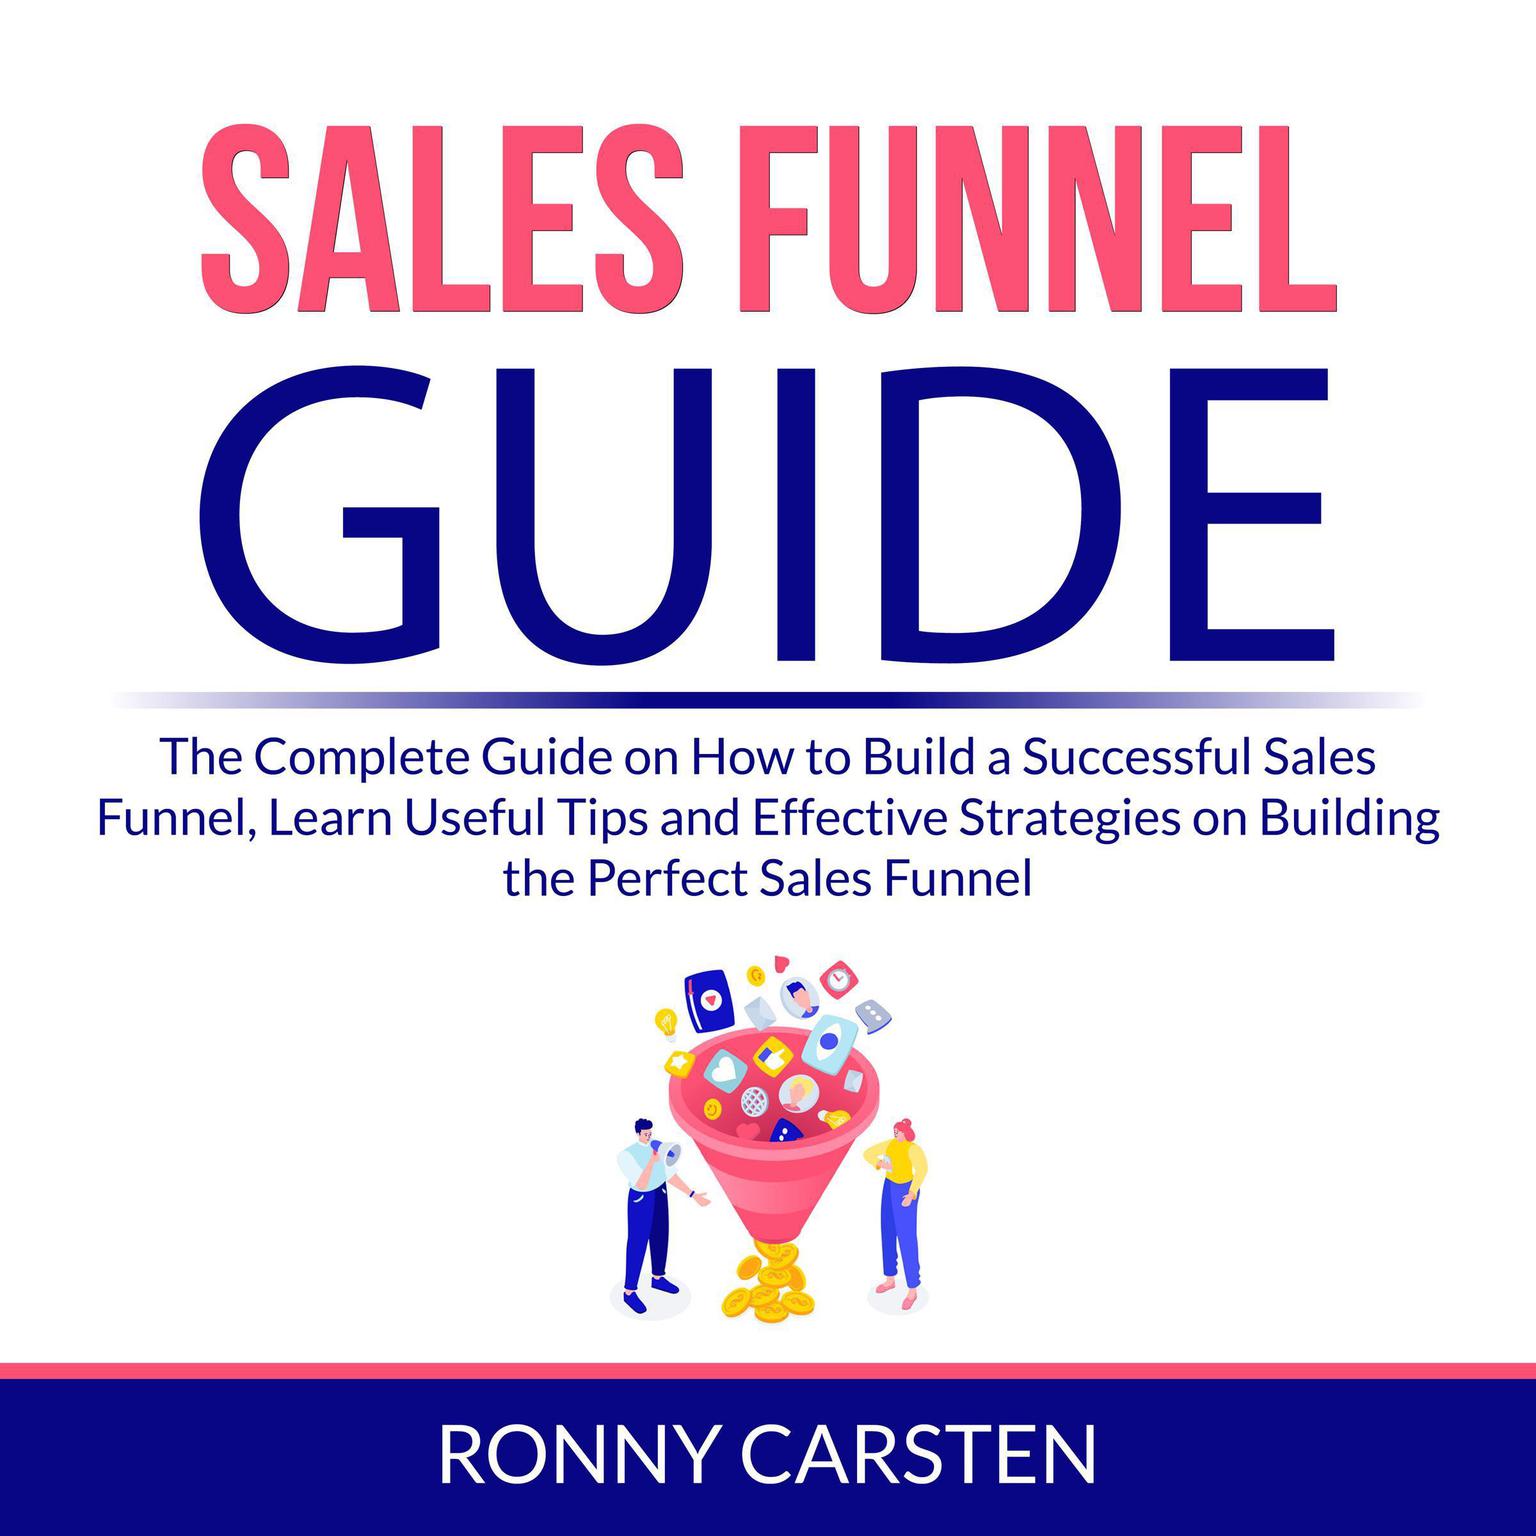 Sales Funnel Guide: The Complete Guide on How to Build a Successful Sales Funnel, Learn Useful Tips and Effective Strategies on Building the Perfect Sales Funnel Audiobook, by Ronny Carsten